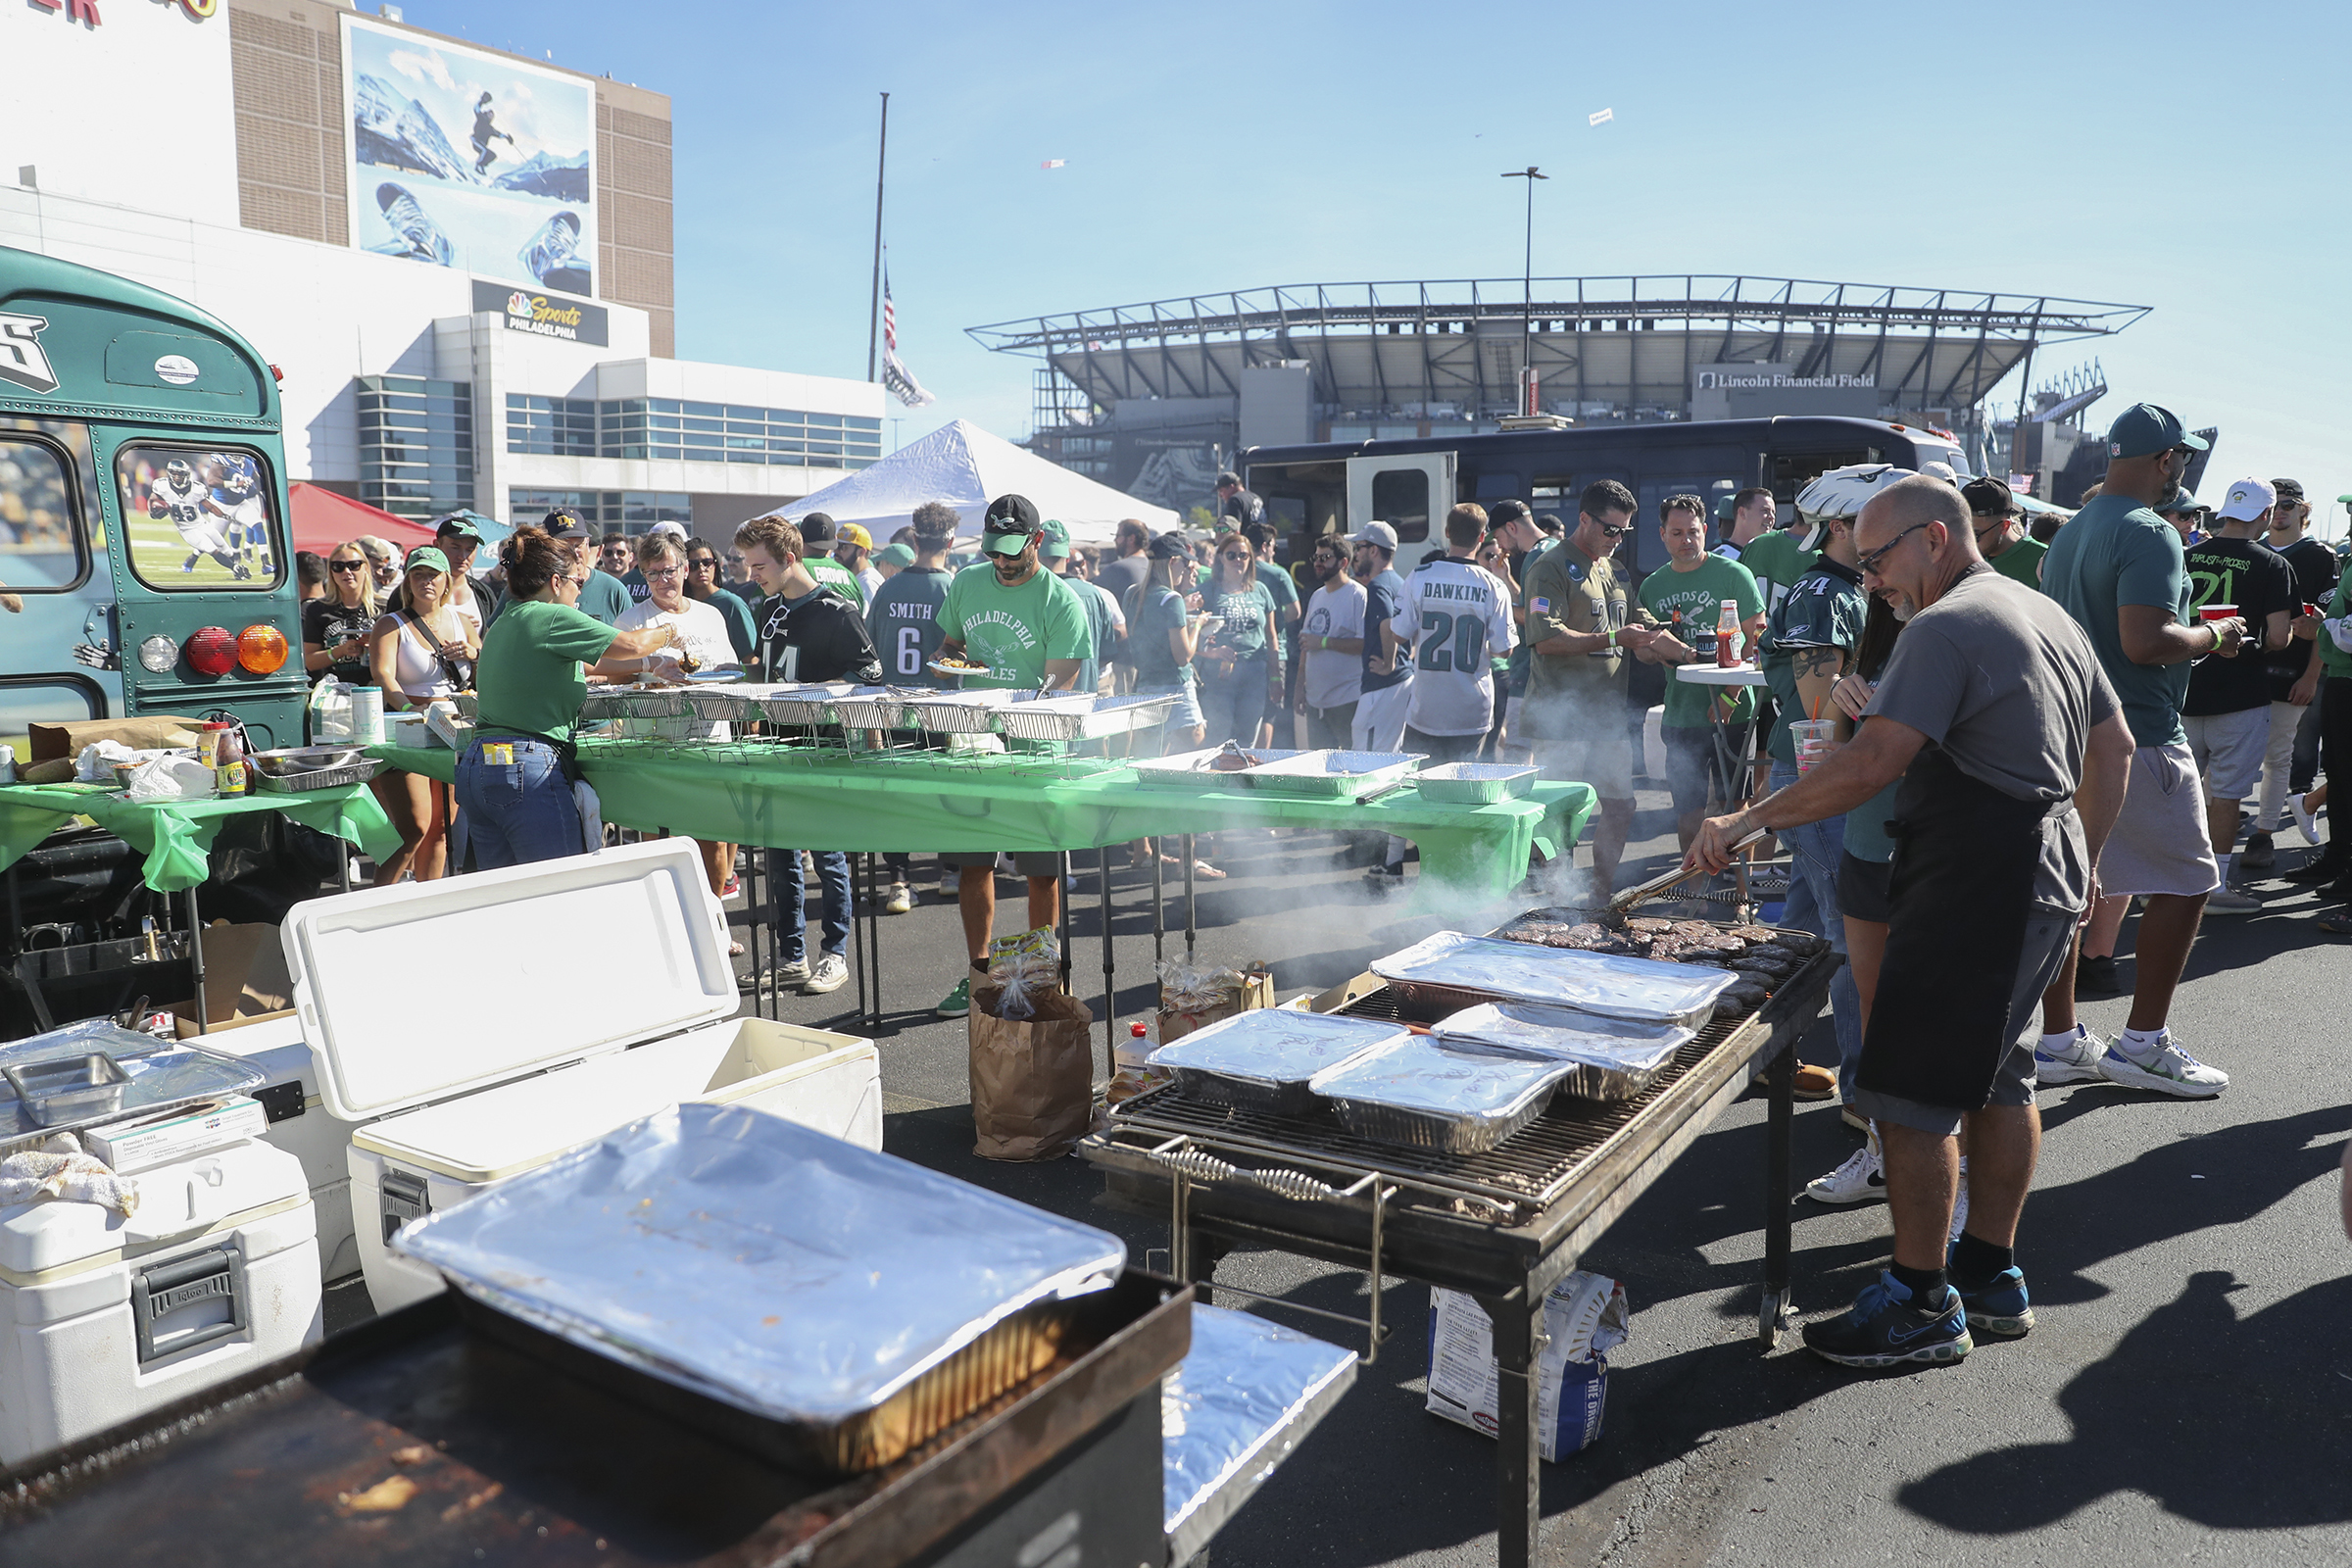 Eagles Game Tickets and Tailgate - Away Game Tailgate